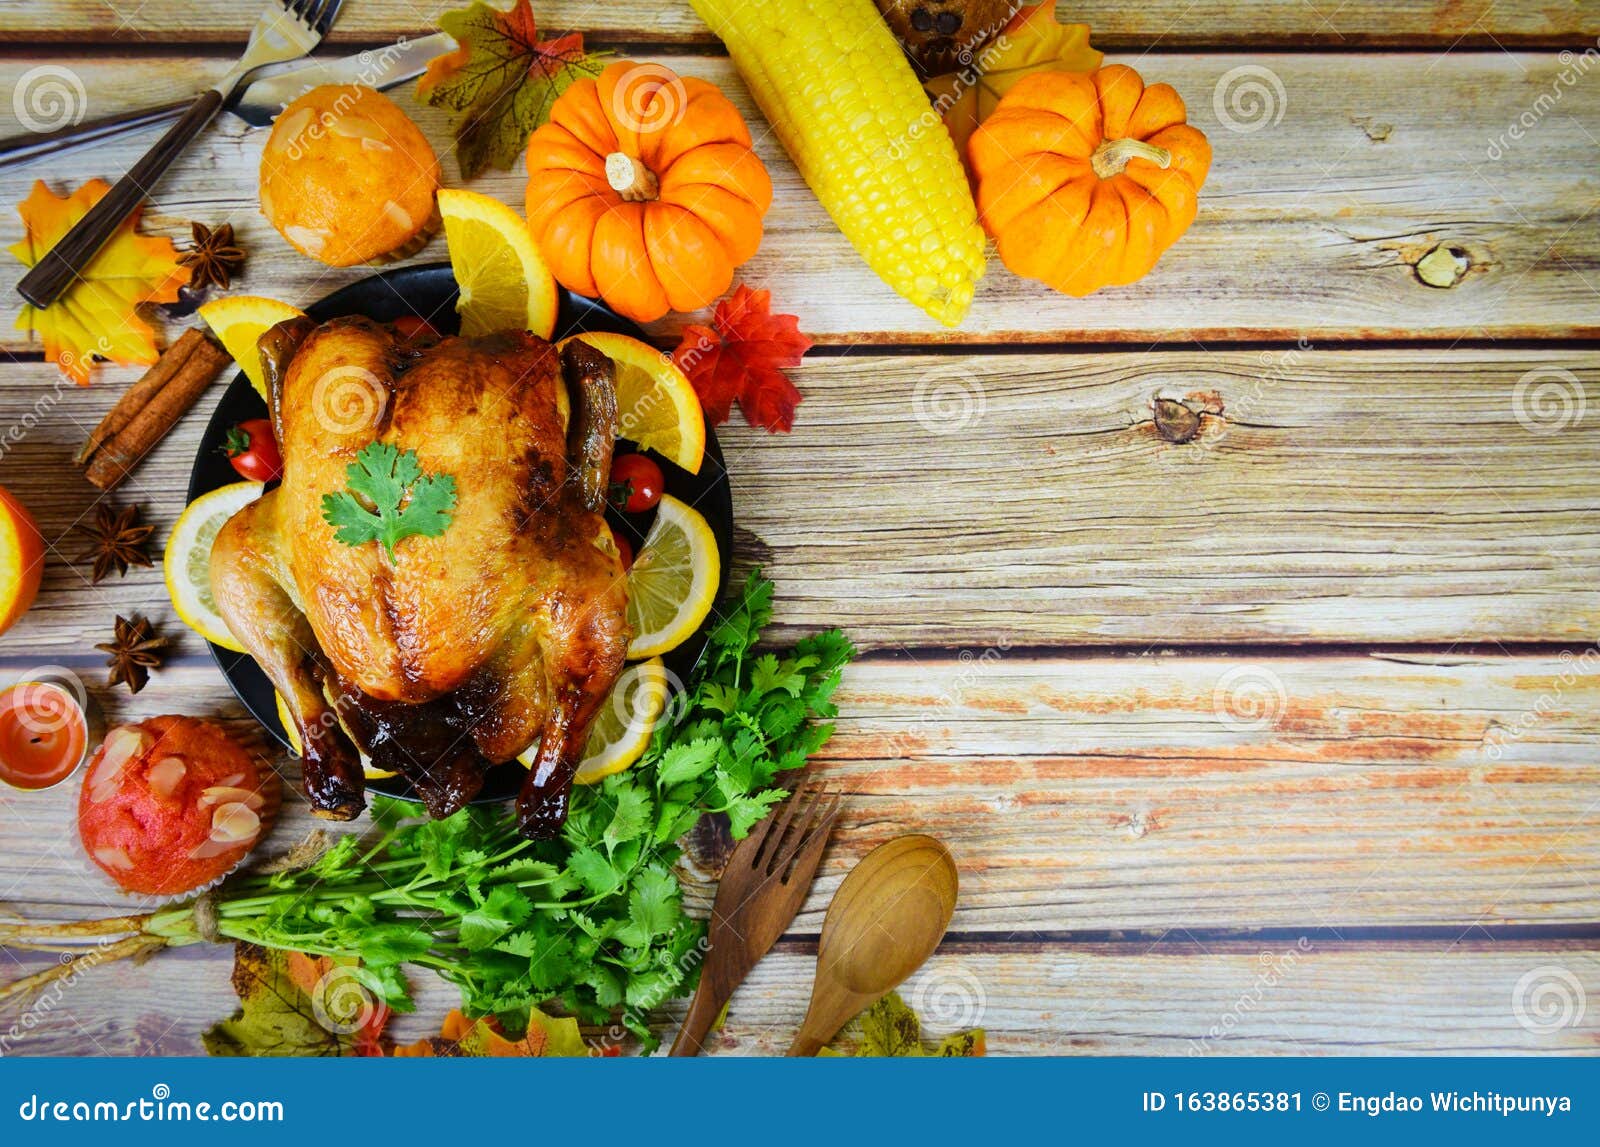 Thanksgiving Dinner with Turkey Vegetable Fruit Served on Holiday ...